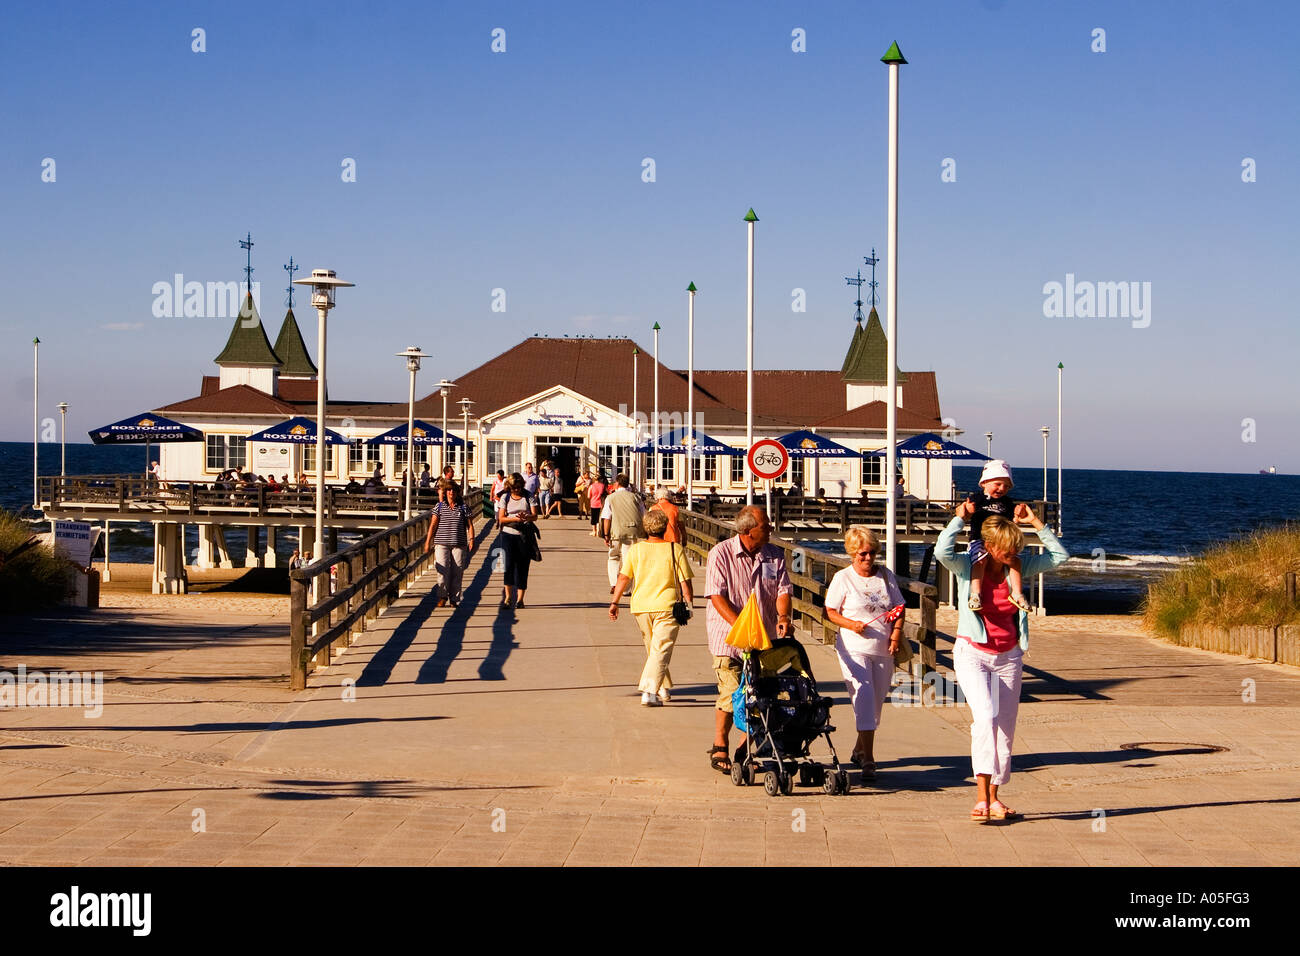 Usedom Ahlbeck art nouveau wooden pier Stock Photo